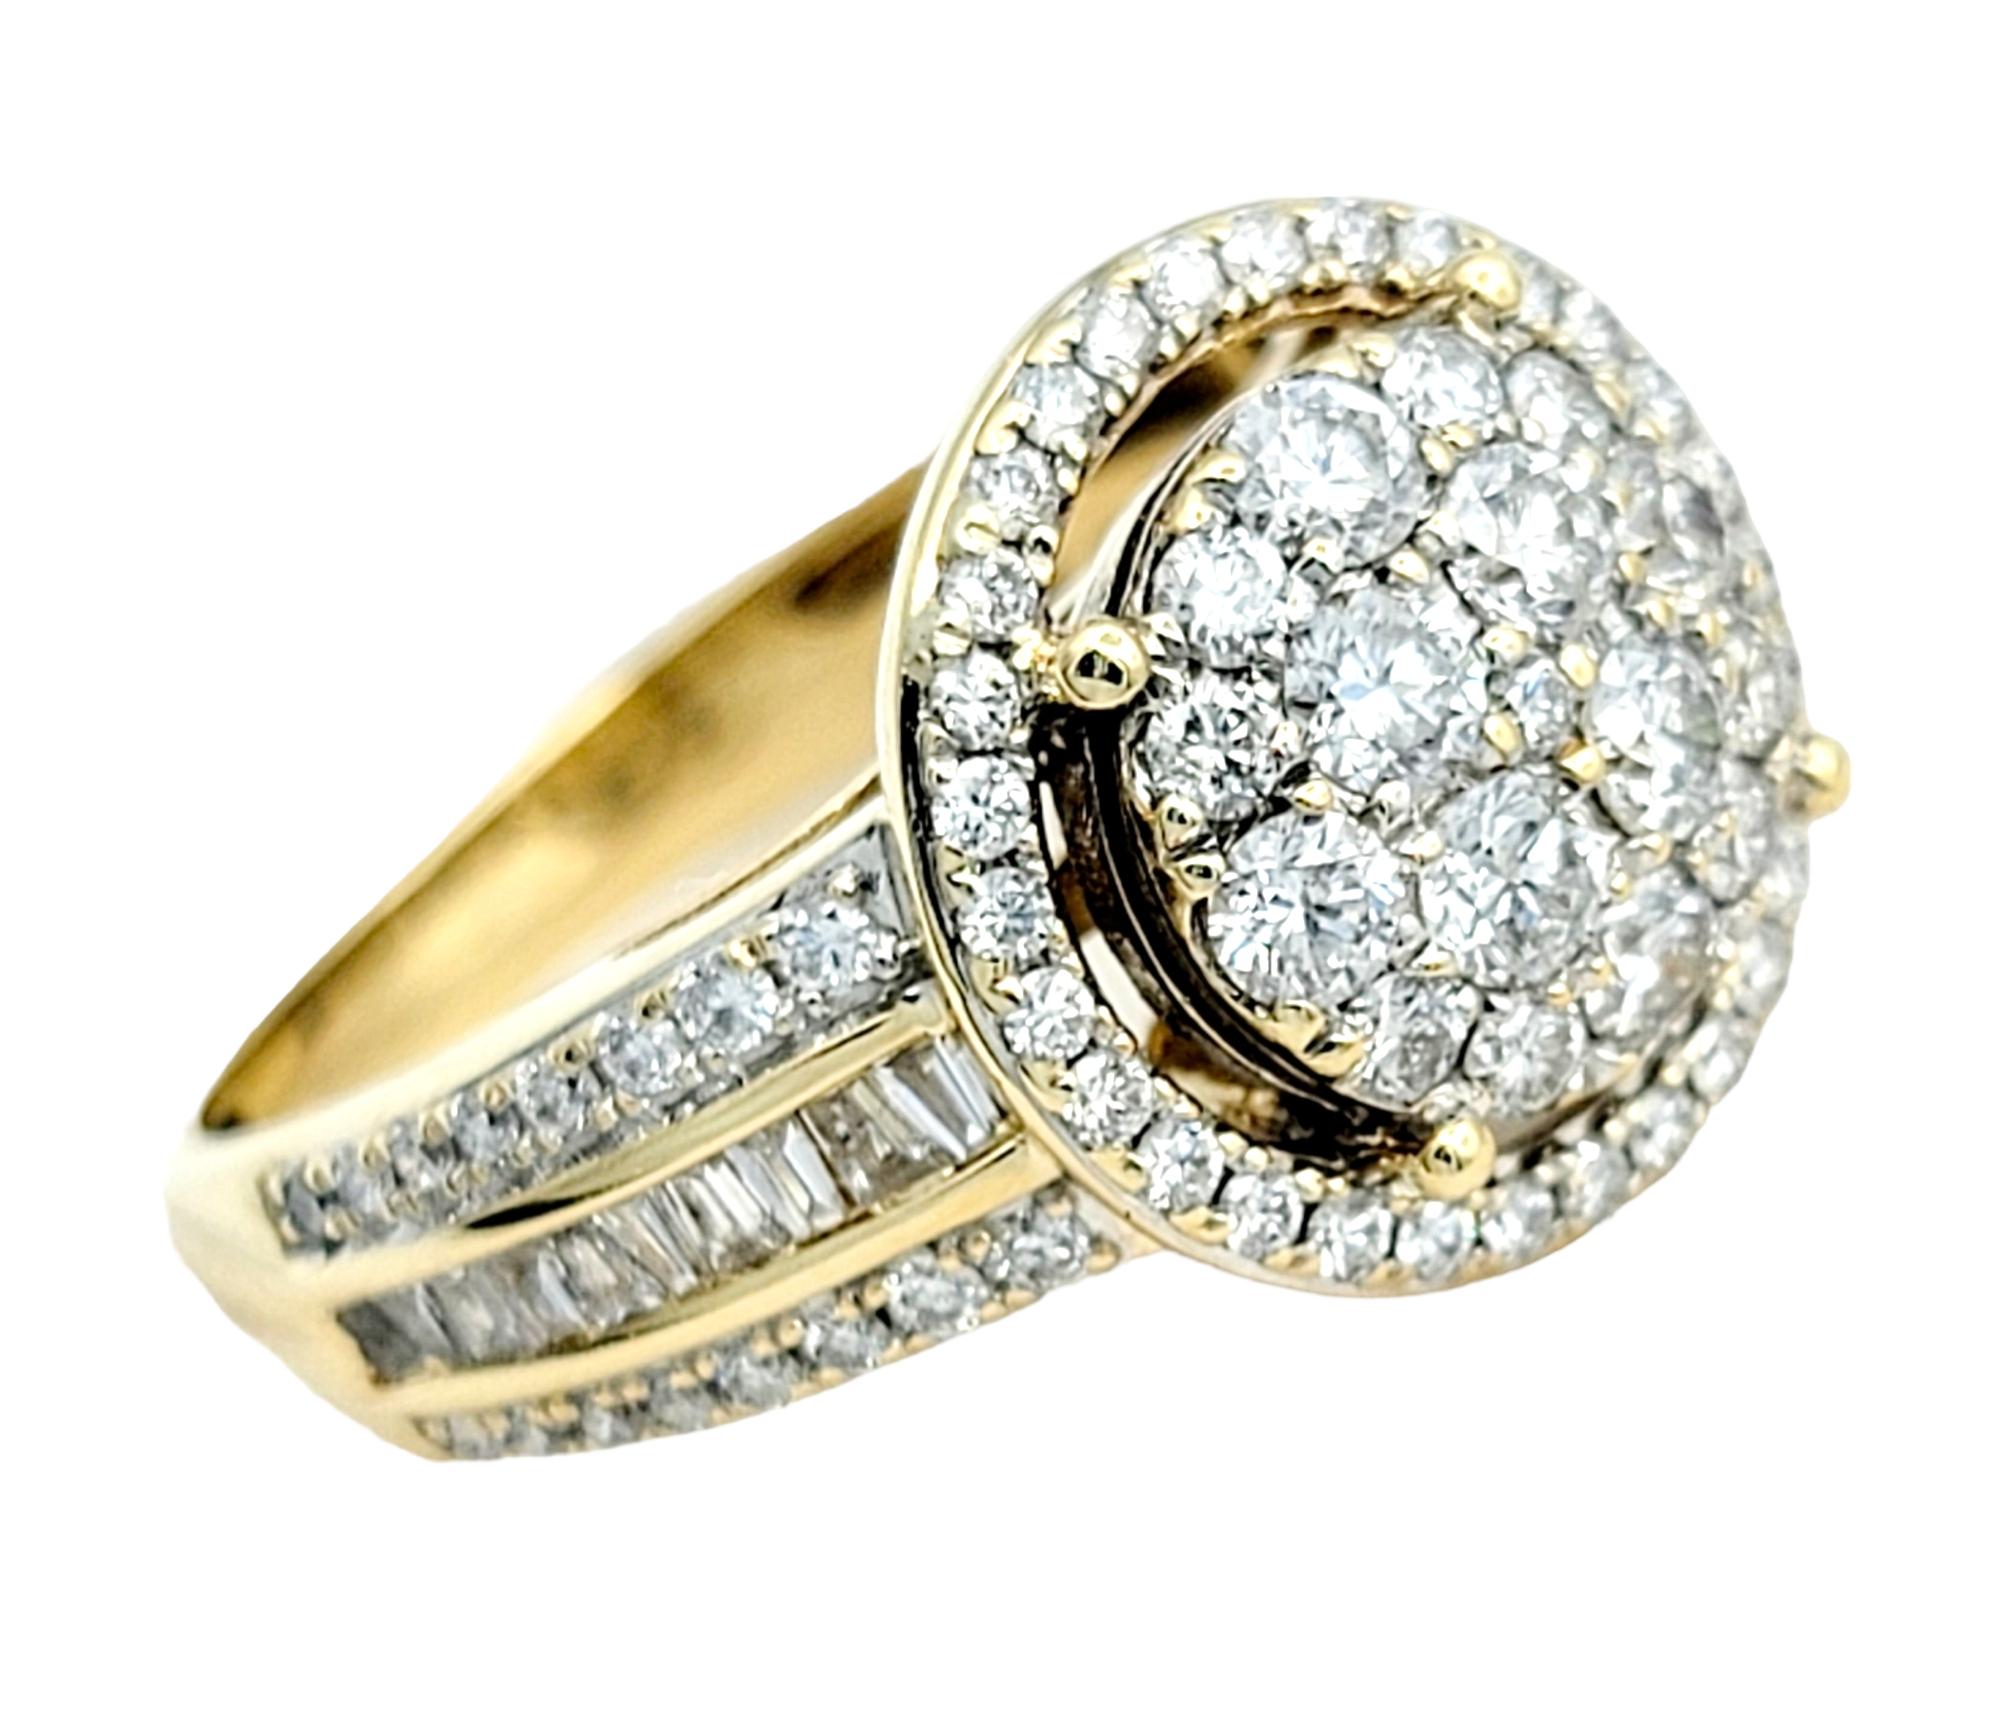 Ring size: 6

Introducing a dazzling diamond ring that sparkles with timeless allure. At its heart, a magnificent round diamond cluster takes center stage, drawing all eyes with its brilliant radiance. This cluster is like a constellation of stars,